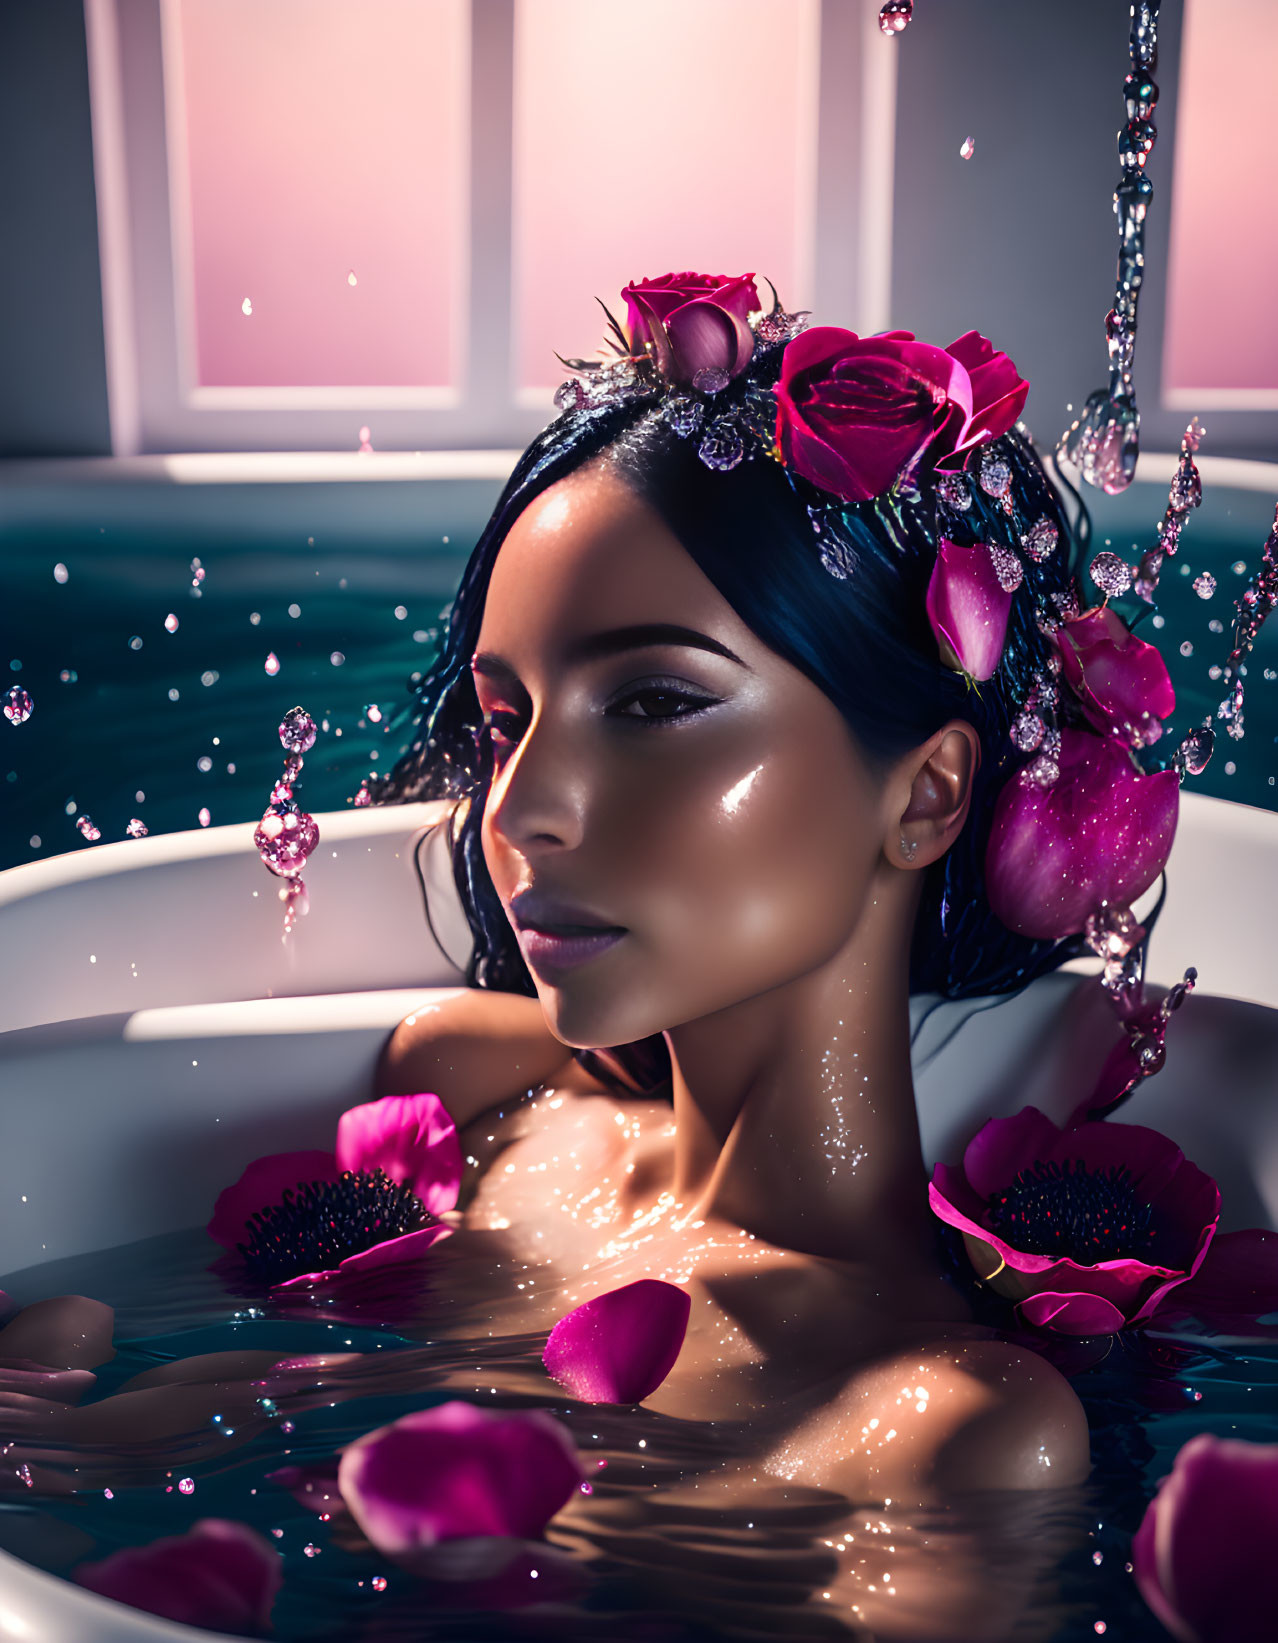 Young Women in Bathtub With Roses 